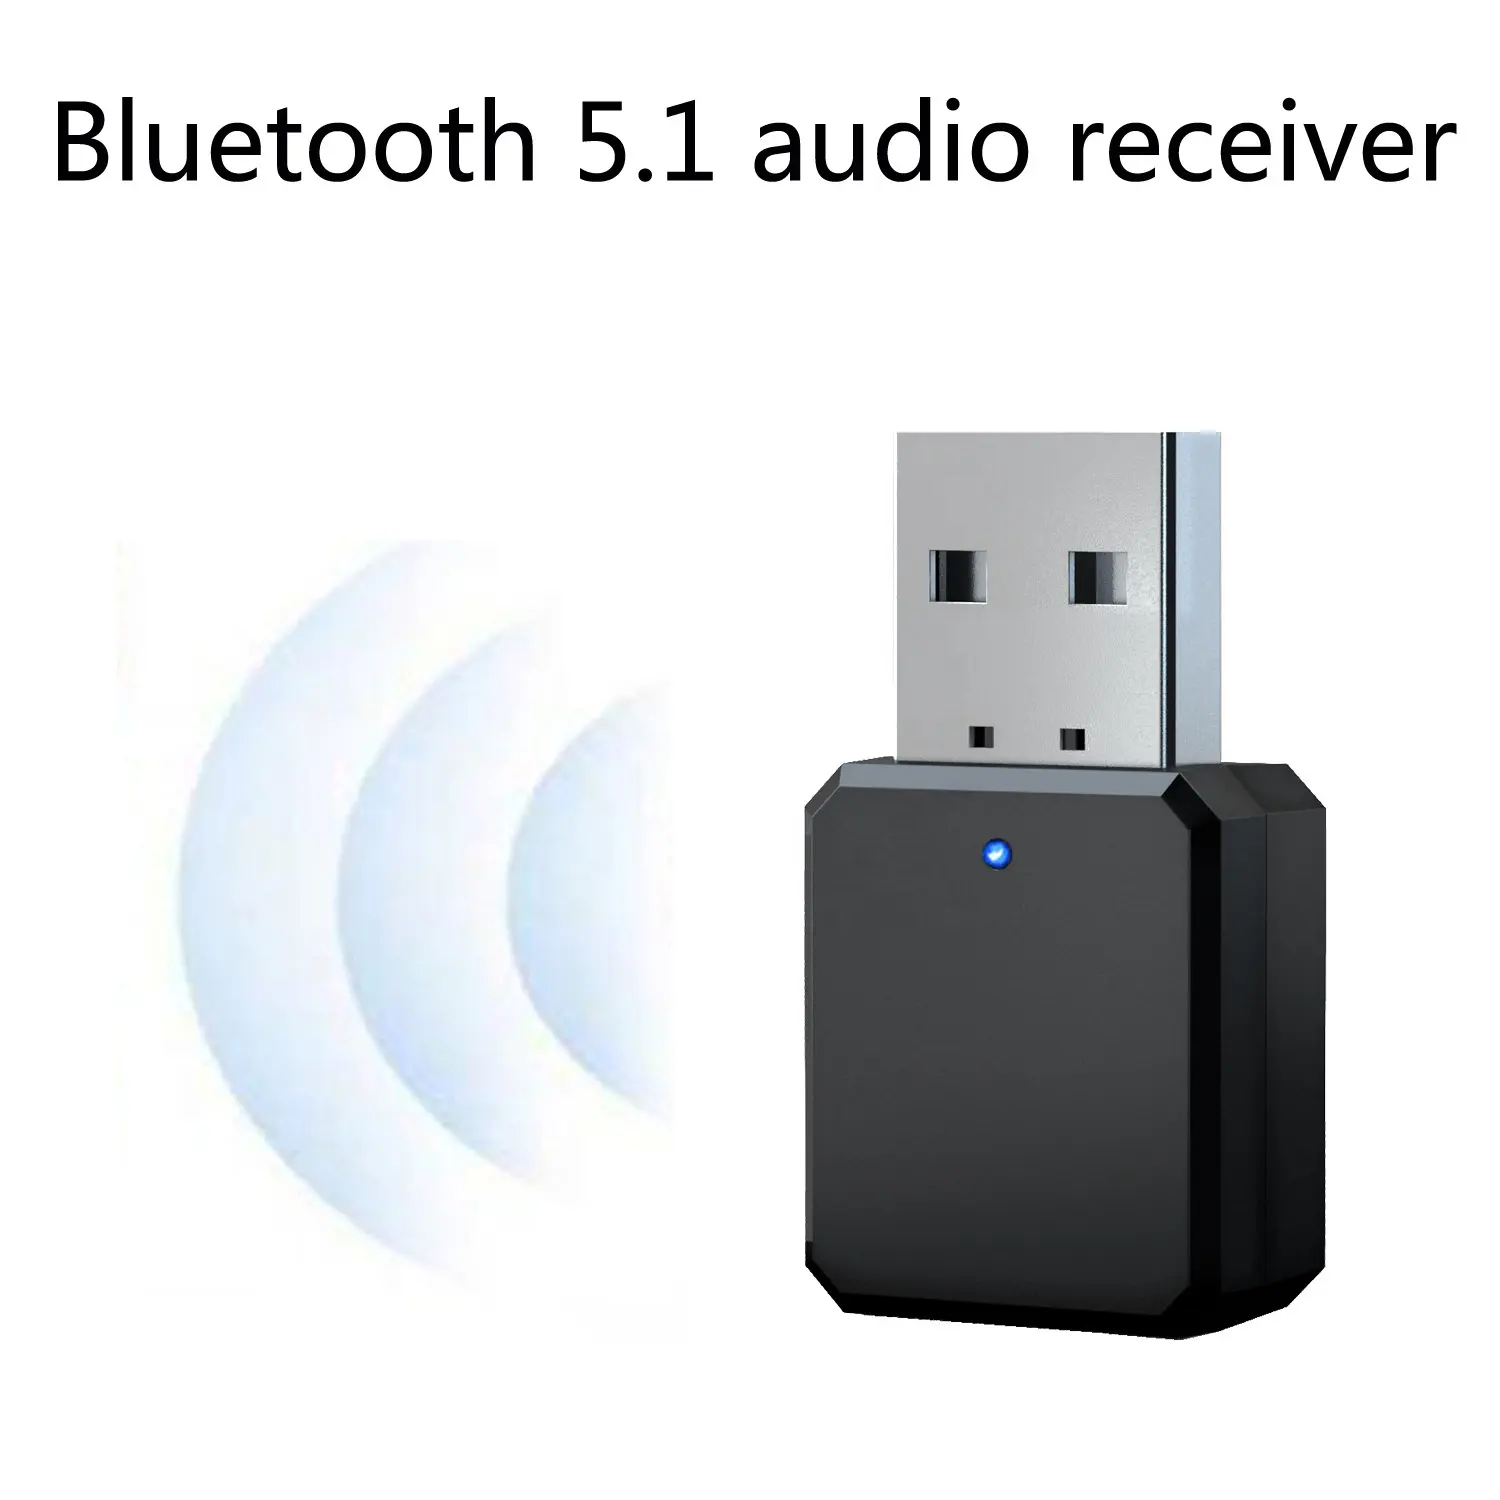 Mini Wireless USB Bluetooth Adapter BT 5.1 Dongle Music Audio Receiver Transmitter for PC Speaker Mouse Laptop Gamepad Car